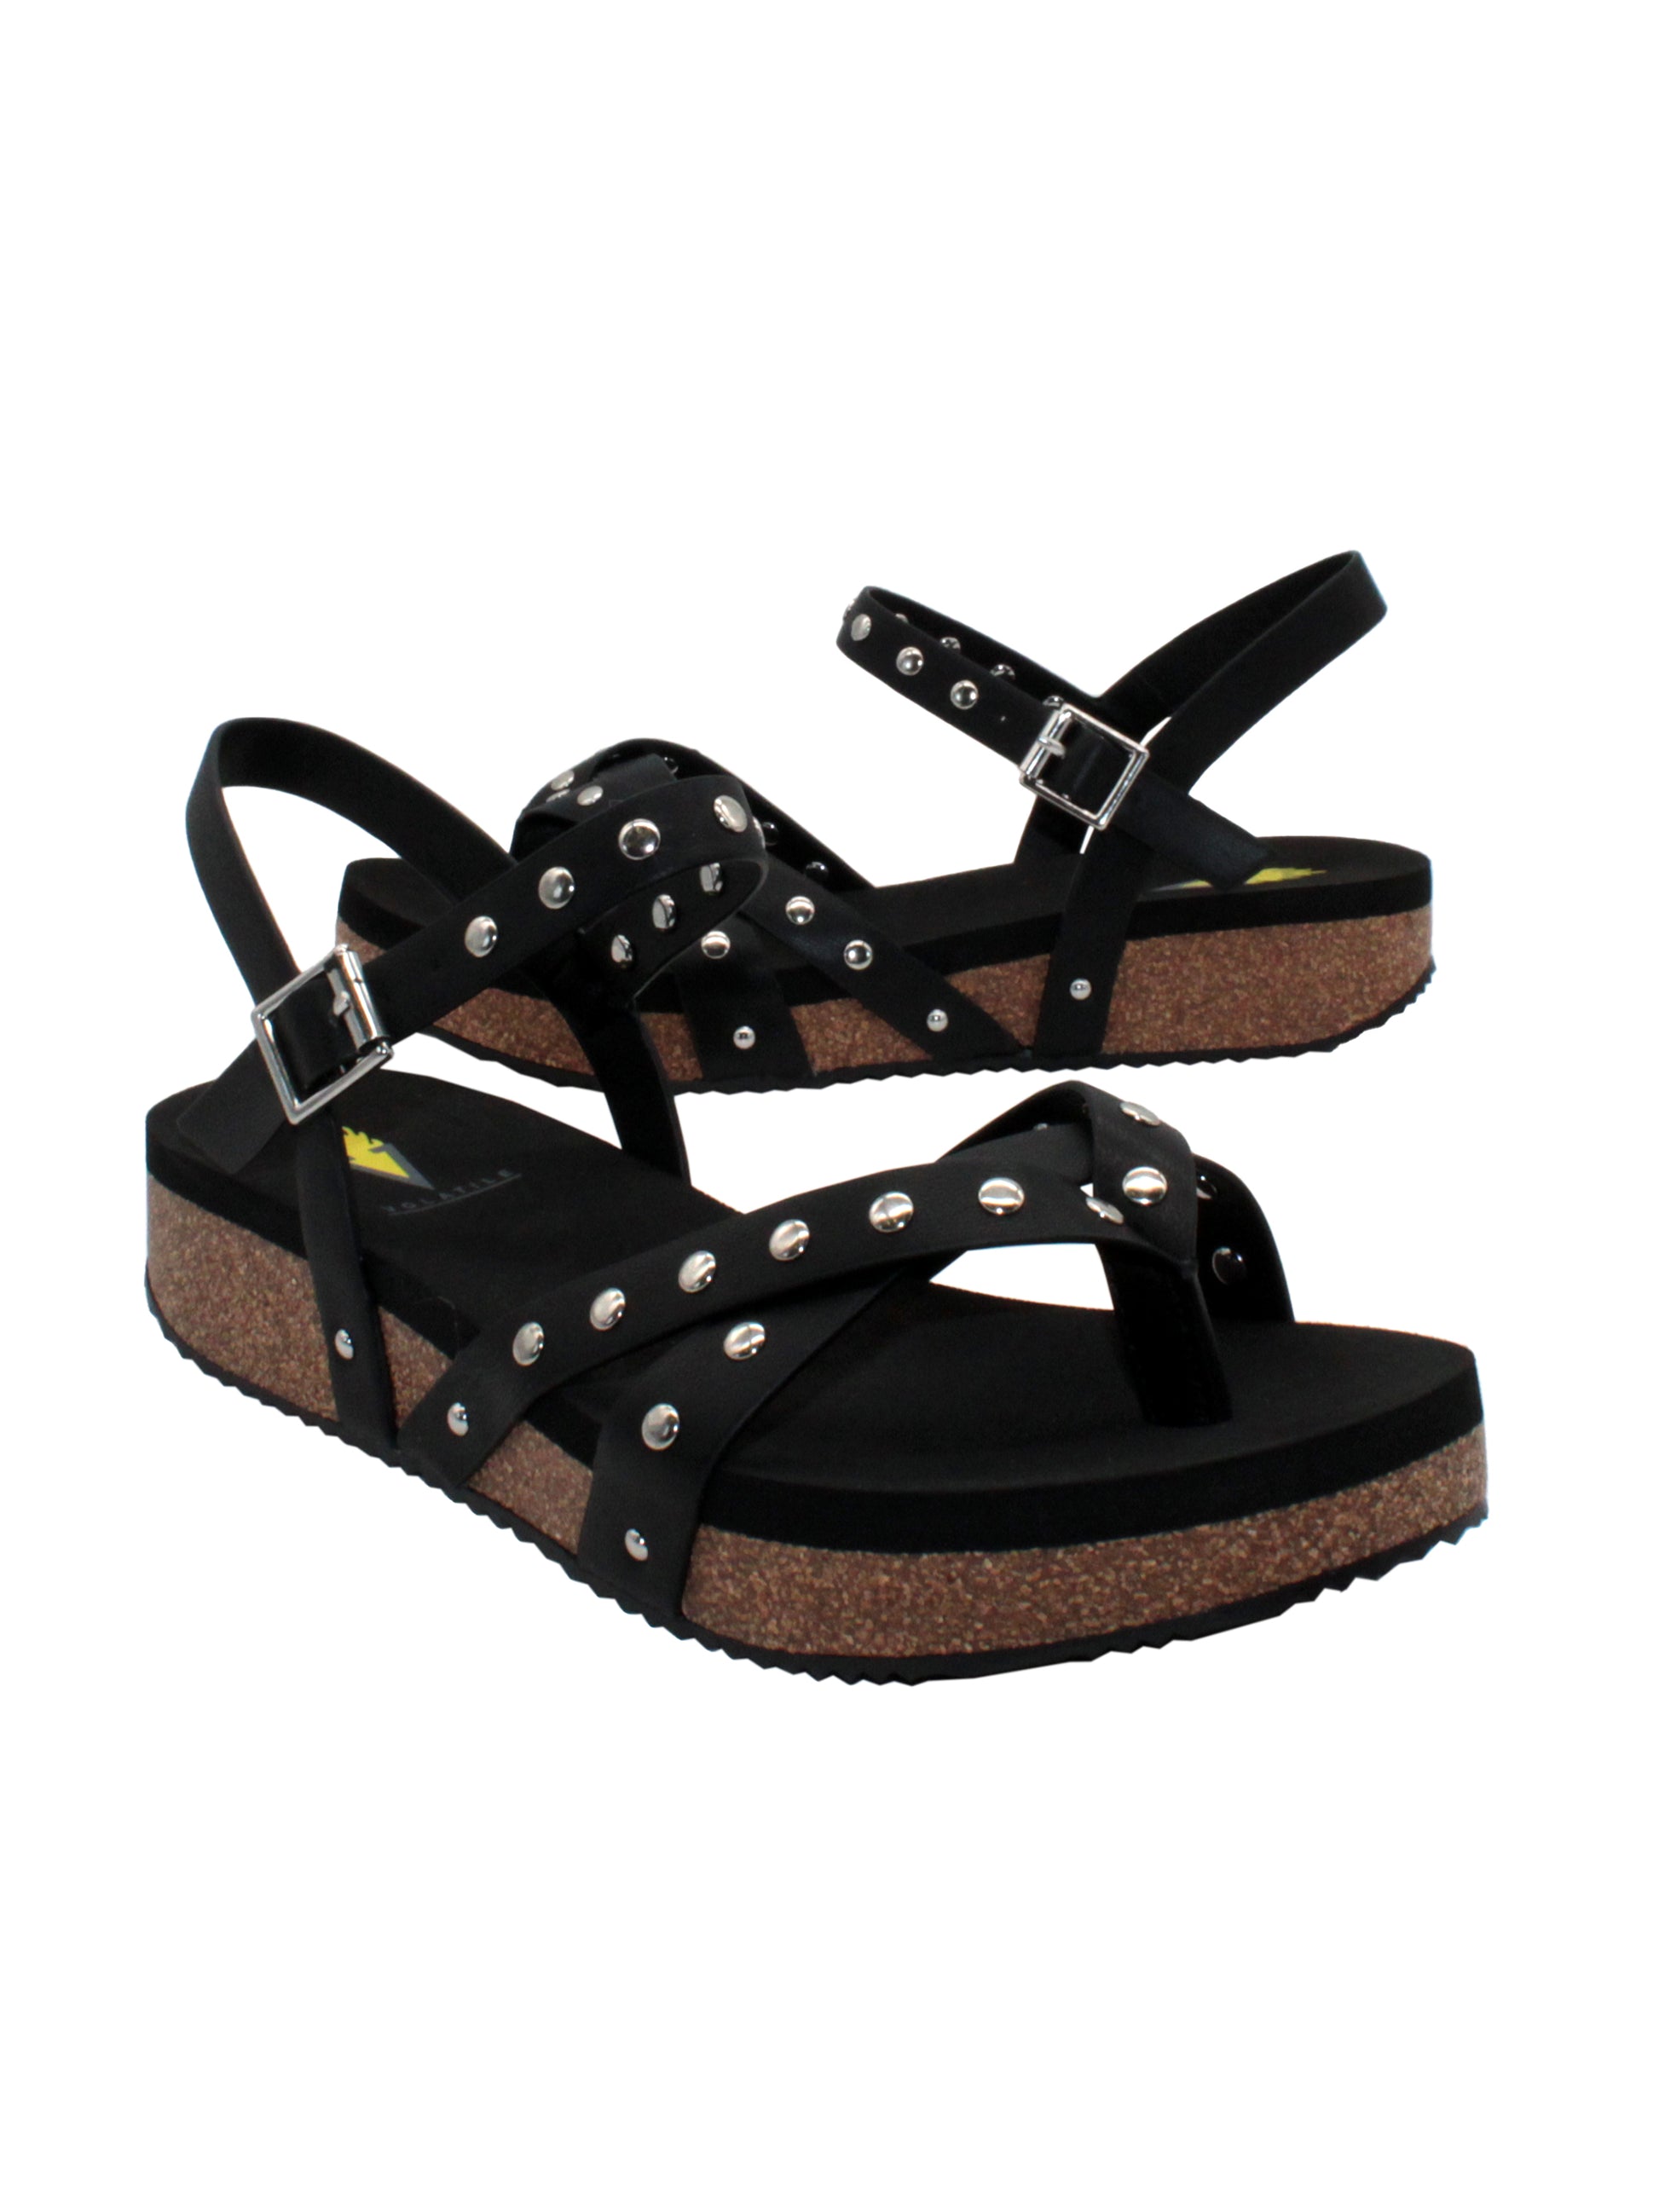  Volatile's Kelton sandal in a vegan leather is our warm weather staple. The low platform wedge adds a subtle lift while offering stability, perfect for dressing up weekend wear or keeping fashionably comfortable at the next outdoor party. Style them with everything, from shorts to dresses, and more. black  2